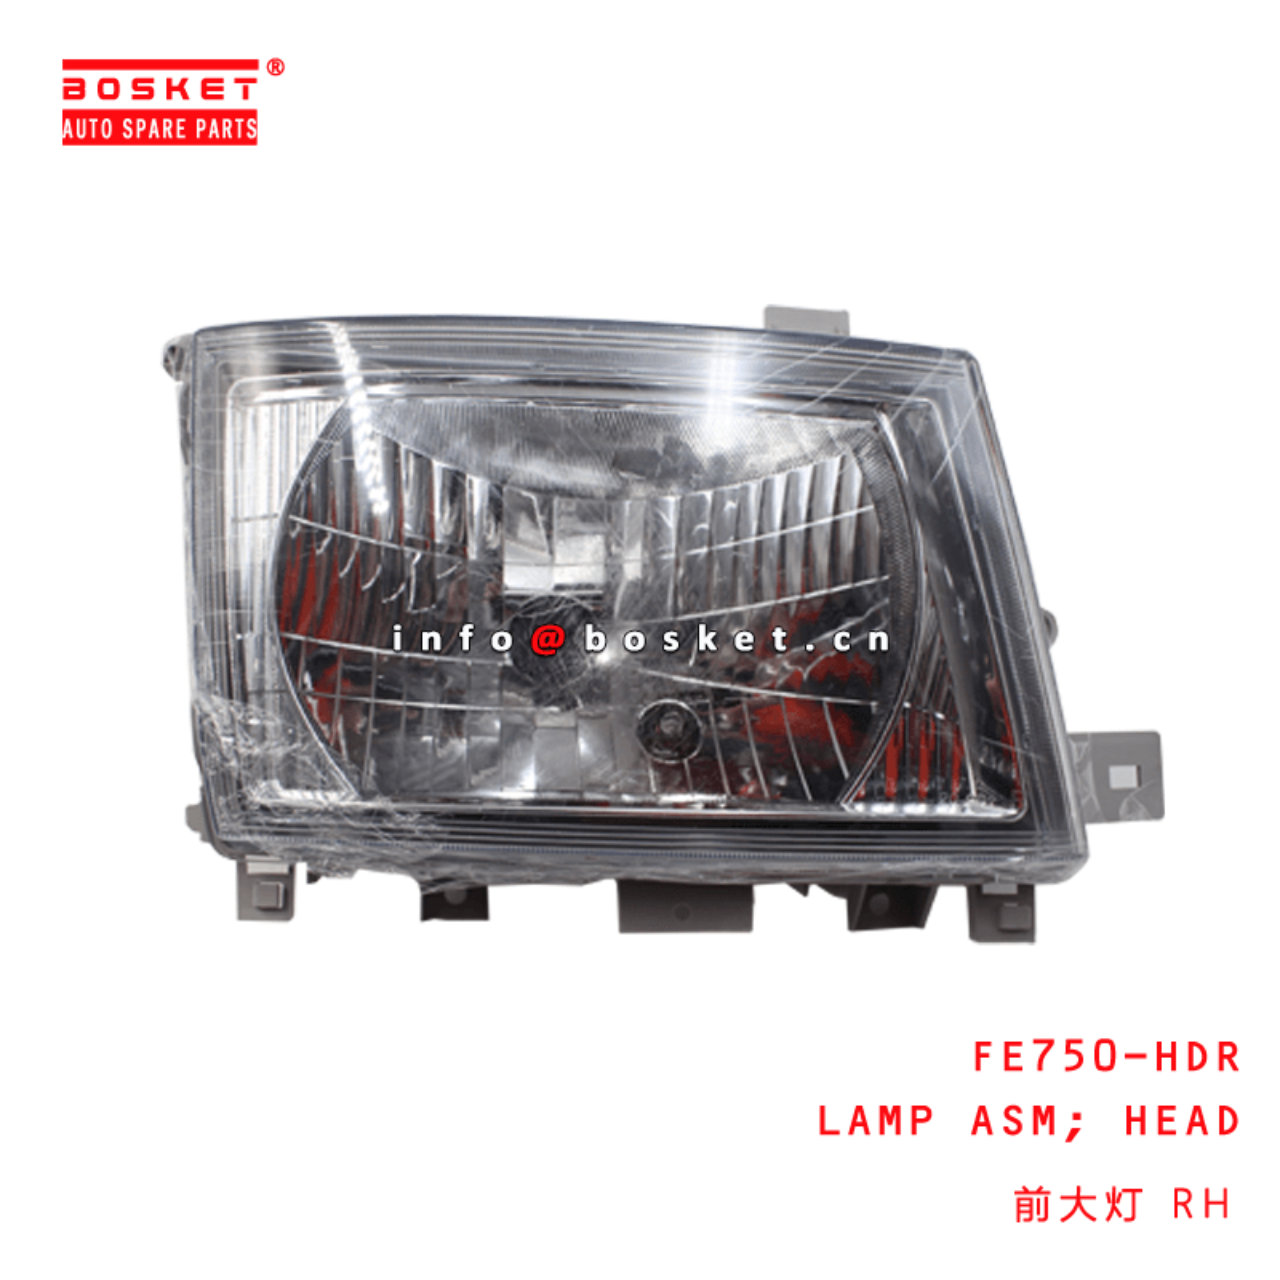 FE750-HDR Head Lamp Assembly Suitable For MITSUBISHI FUSO CANTER FE750